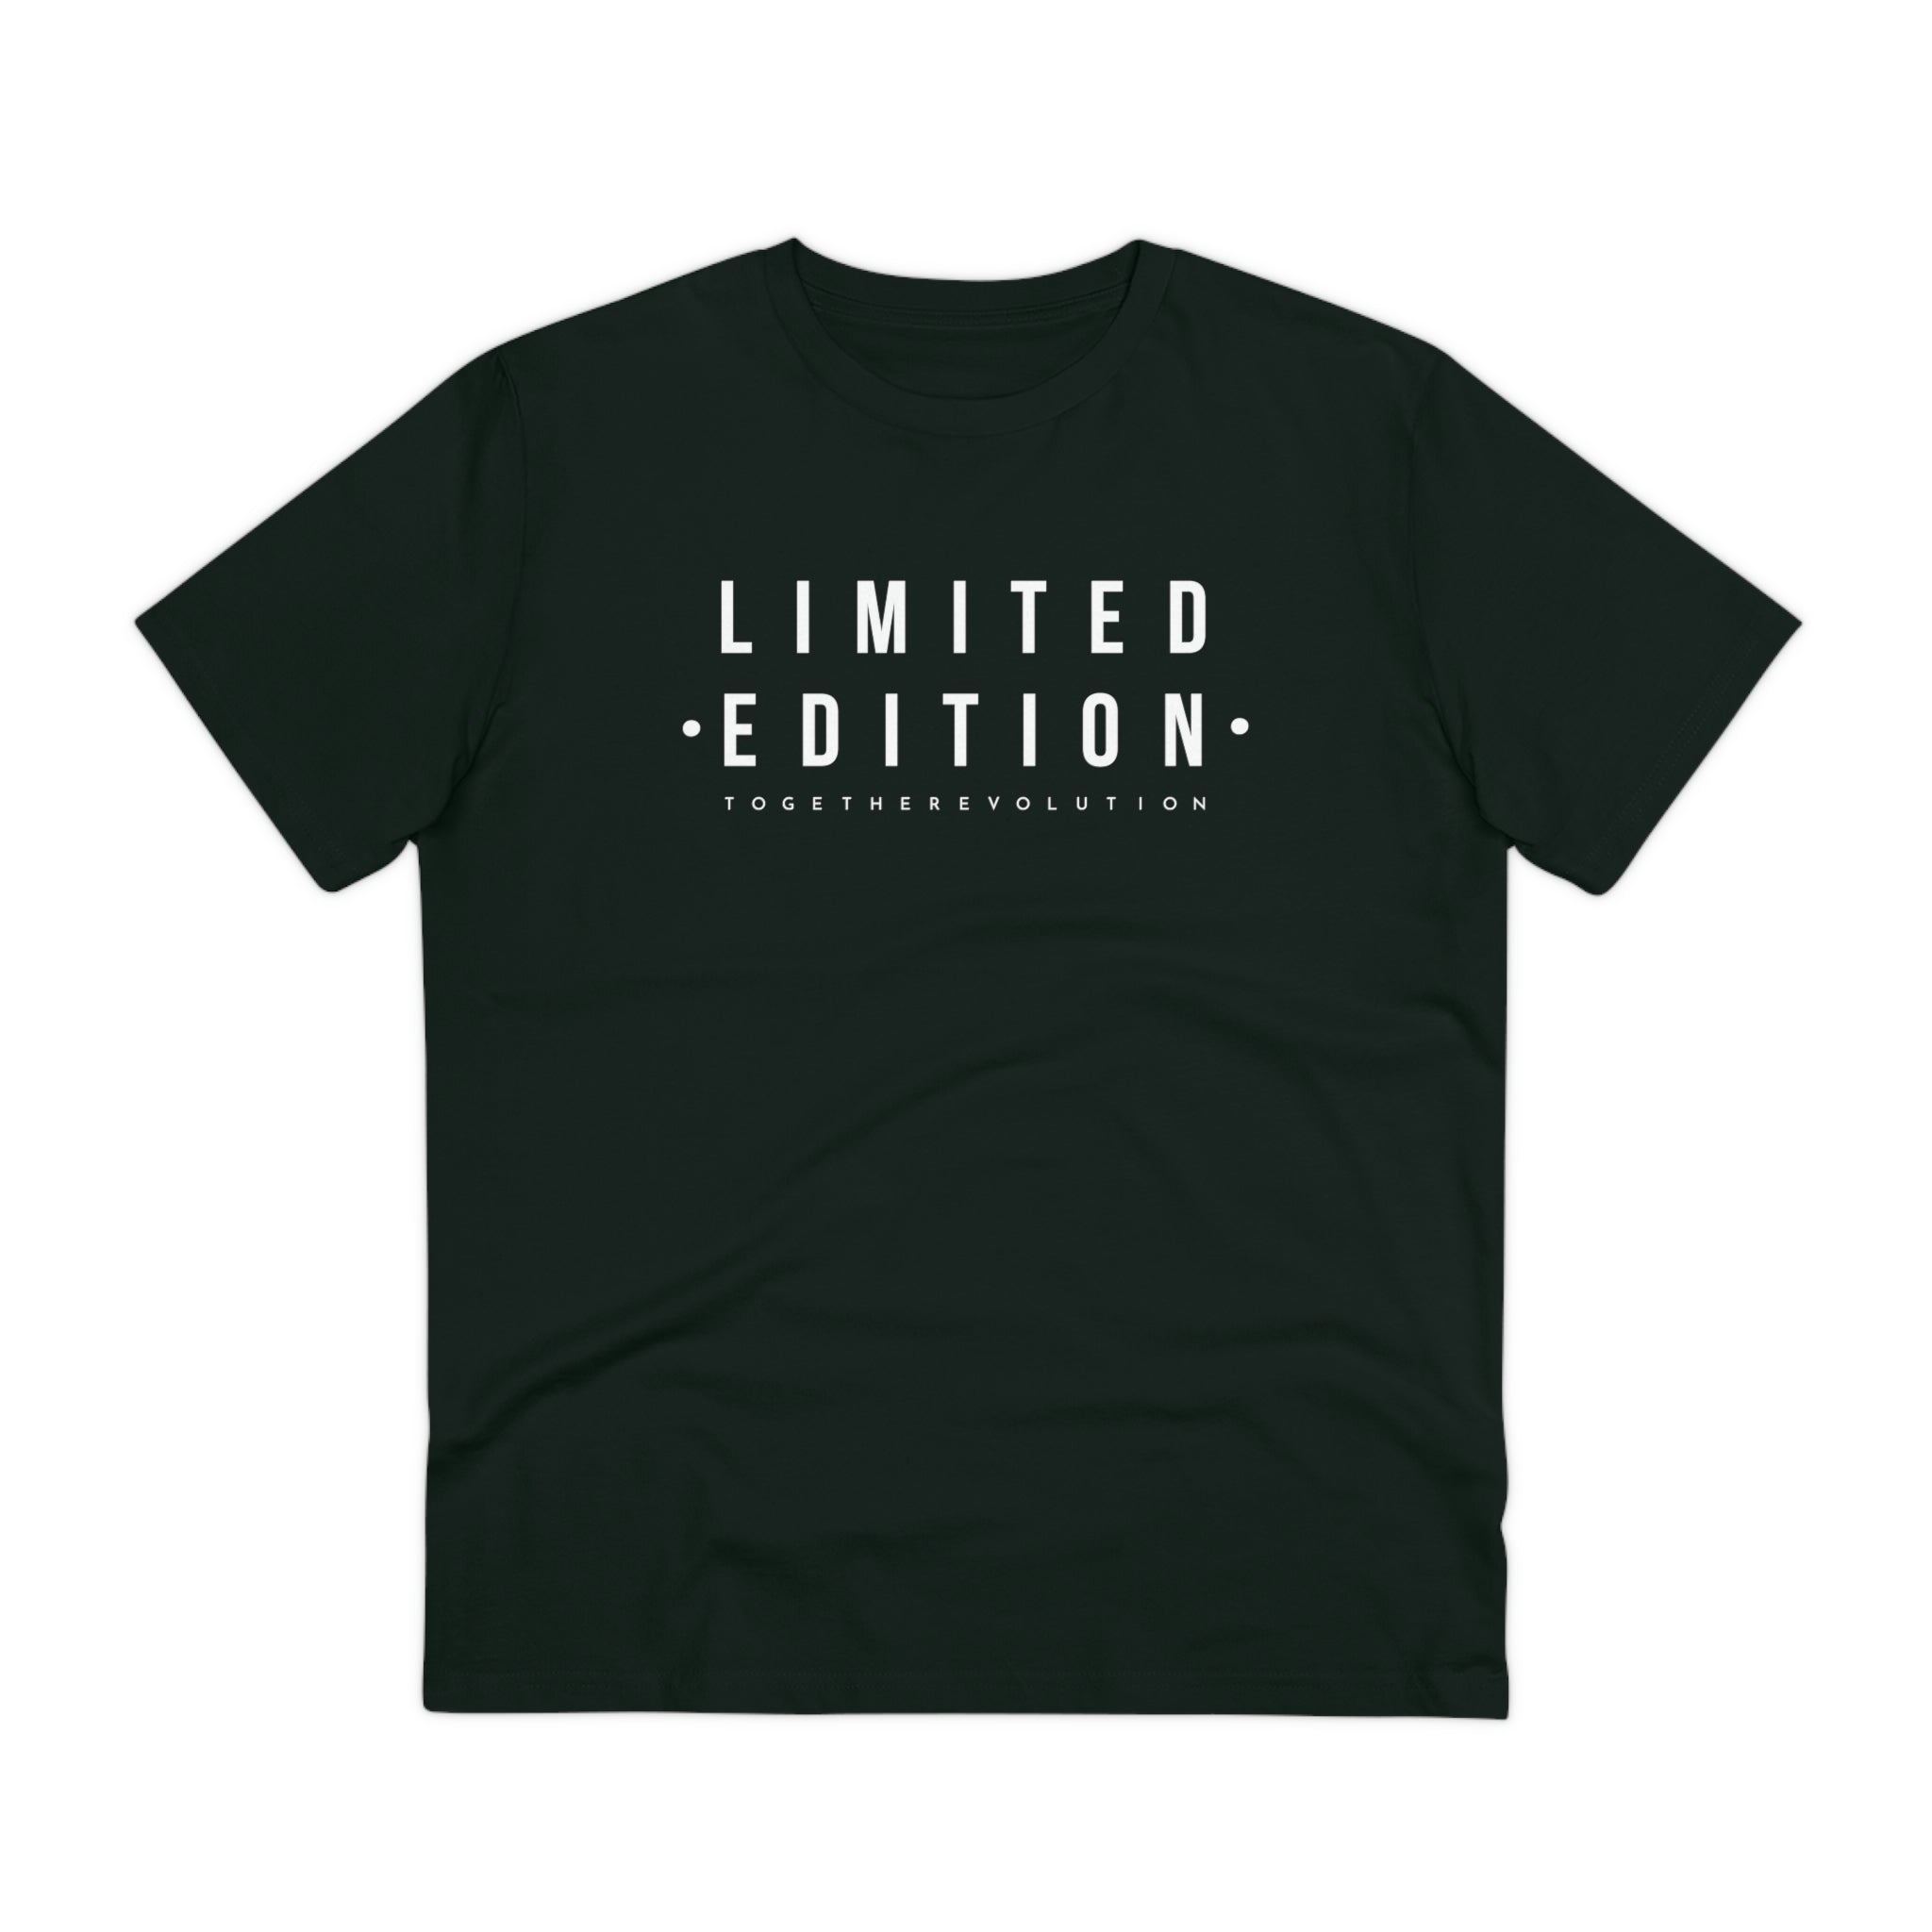 Limited Edition - the Together Revolution